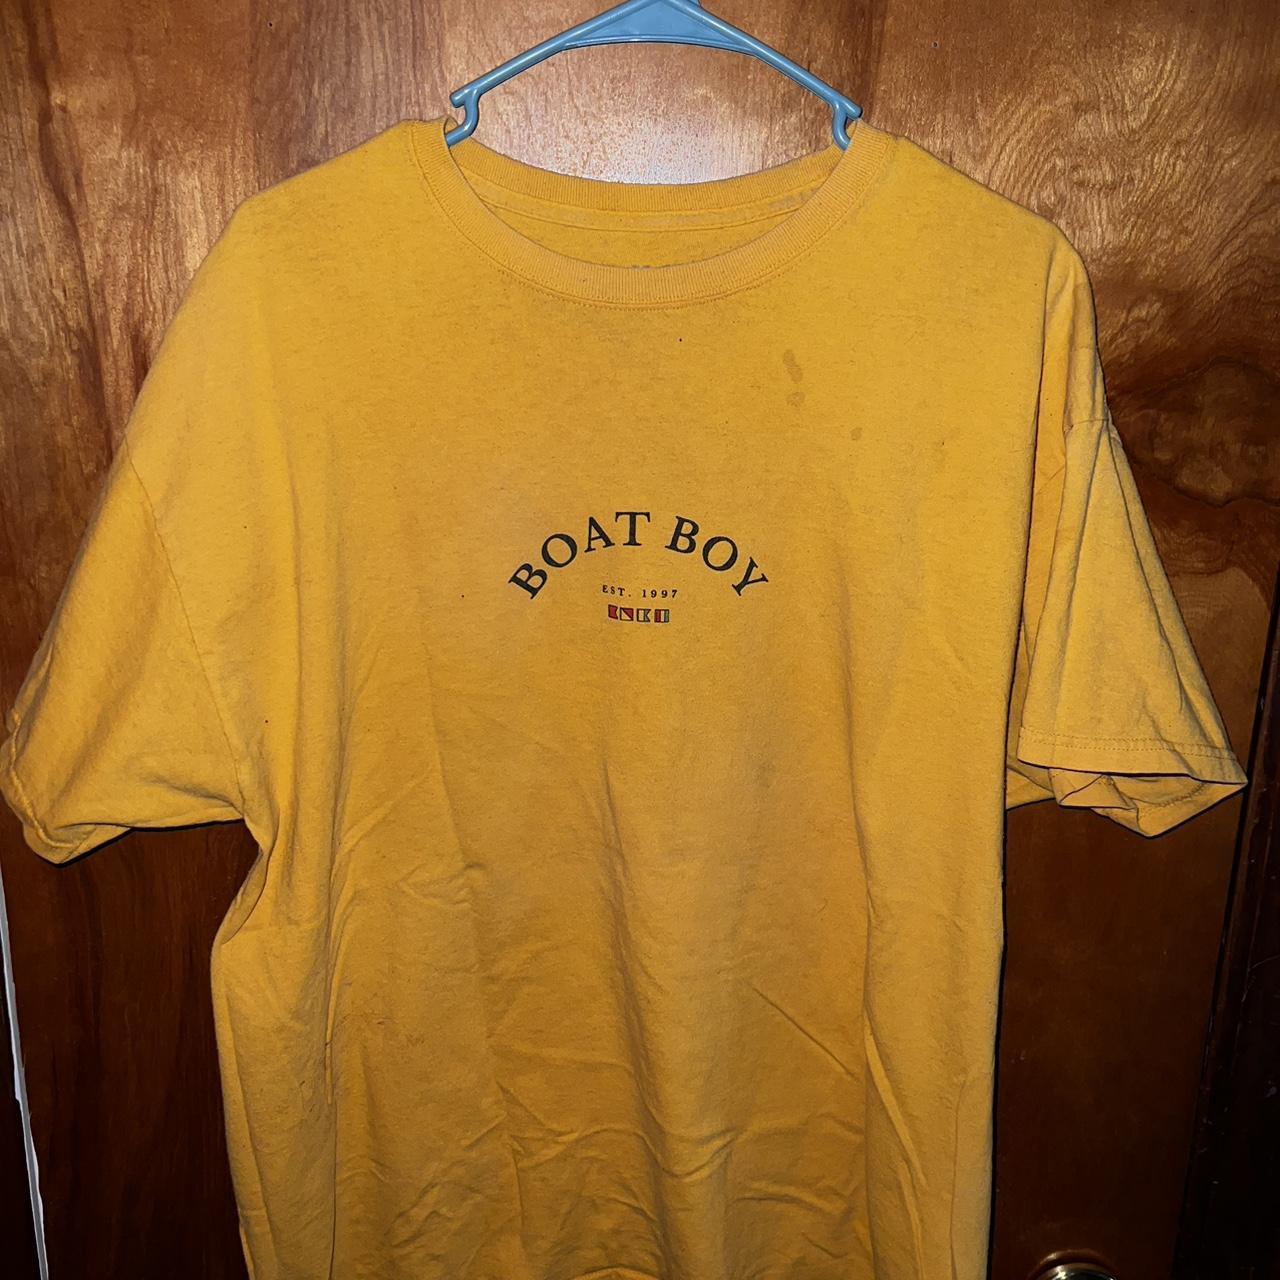 Urban Outfitters Men's Yellow and Red T-shirt